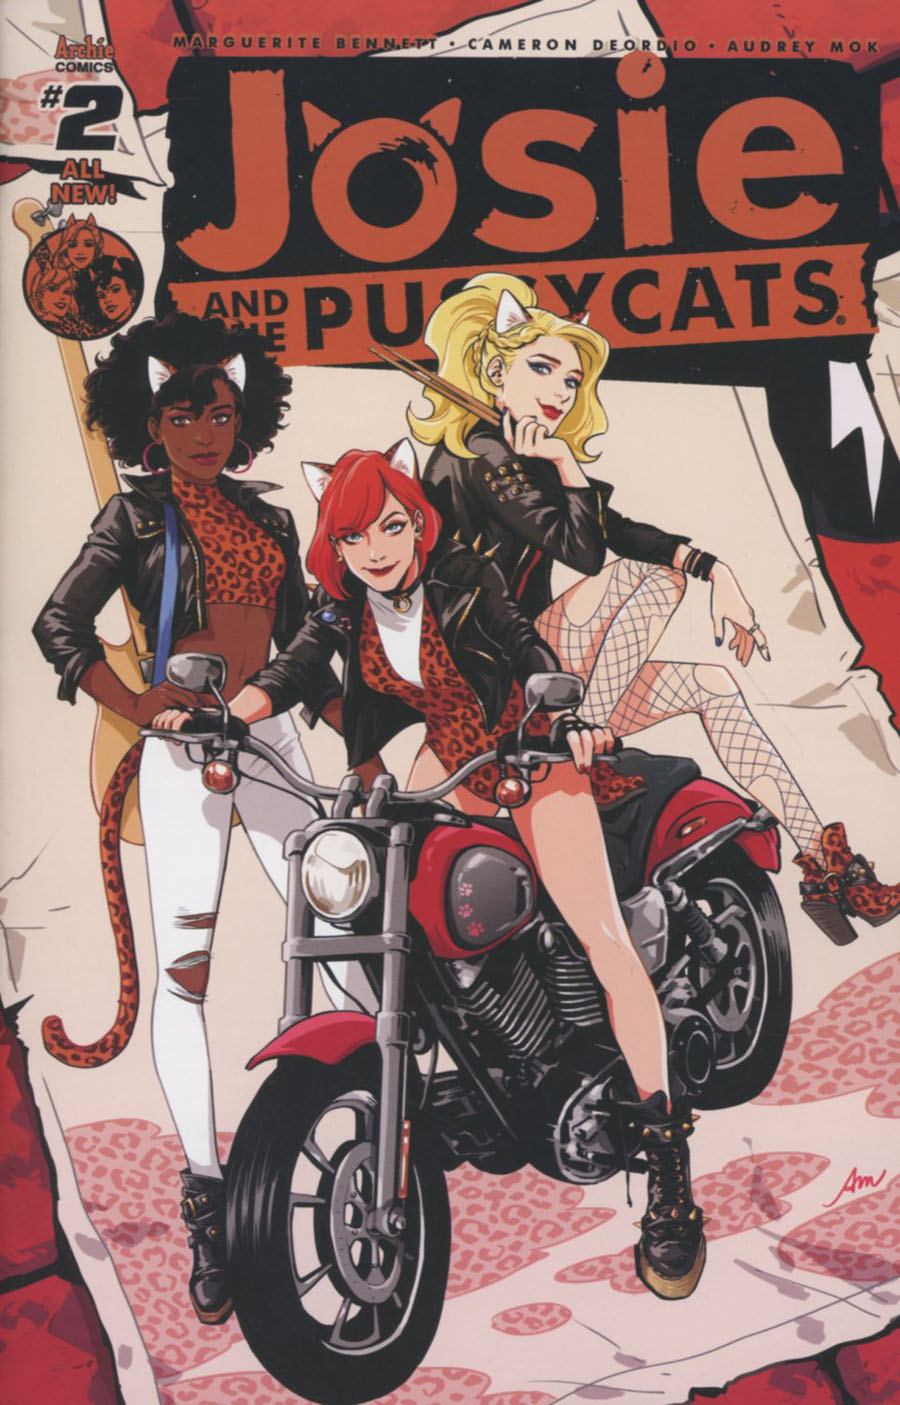 Josie And The Pussycats Vol 2 #2 Cover A Regular Audrey Mok Cover